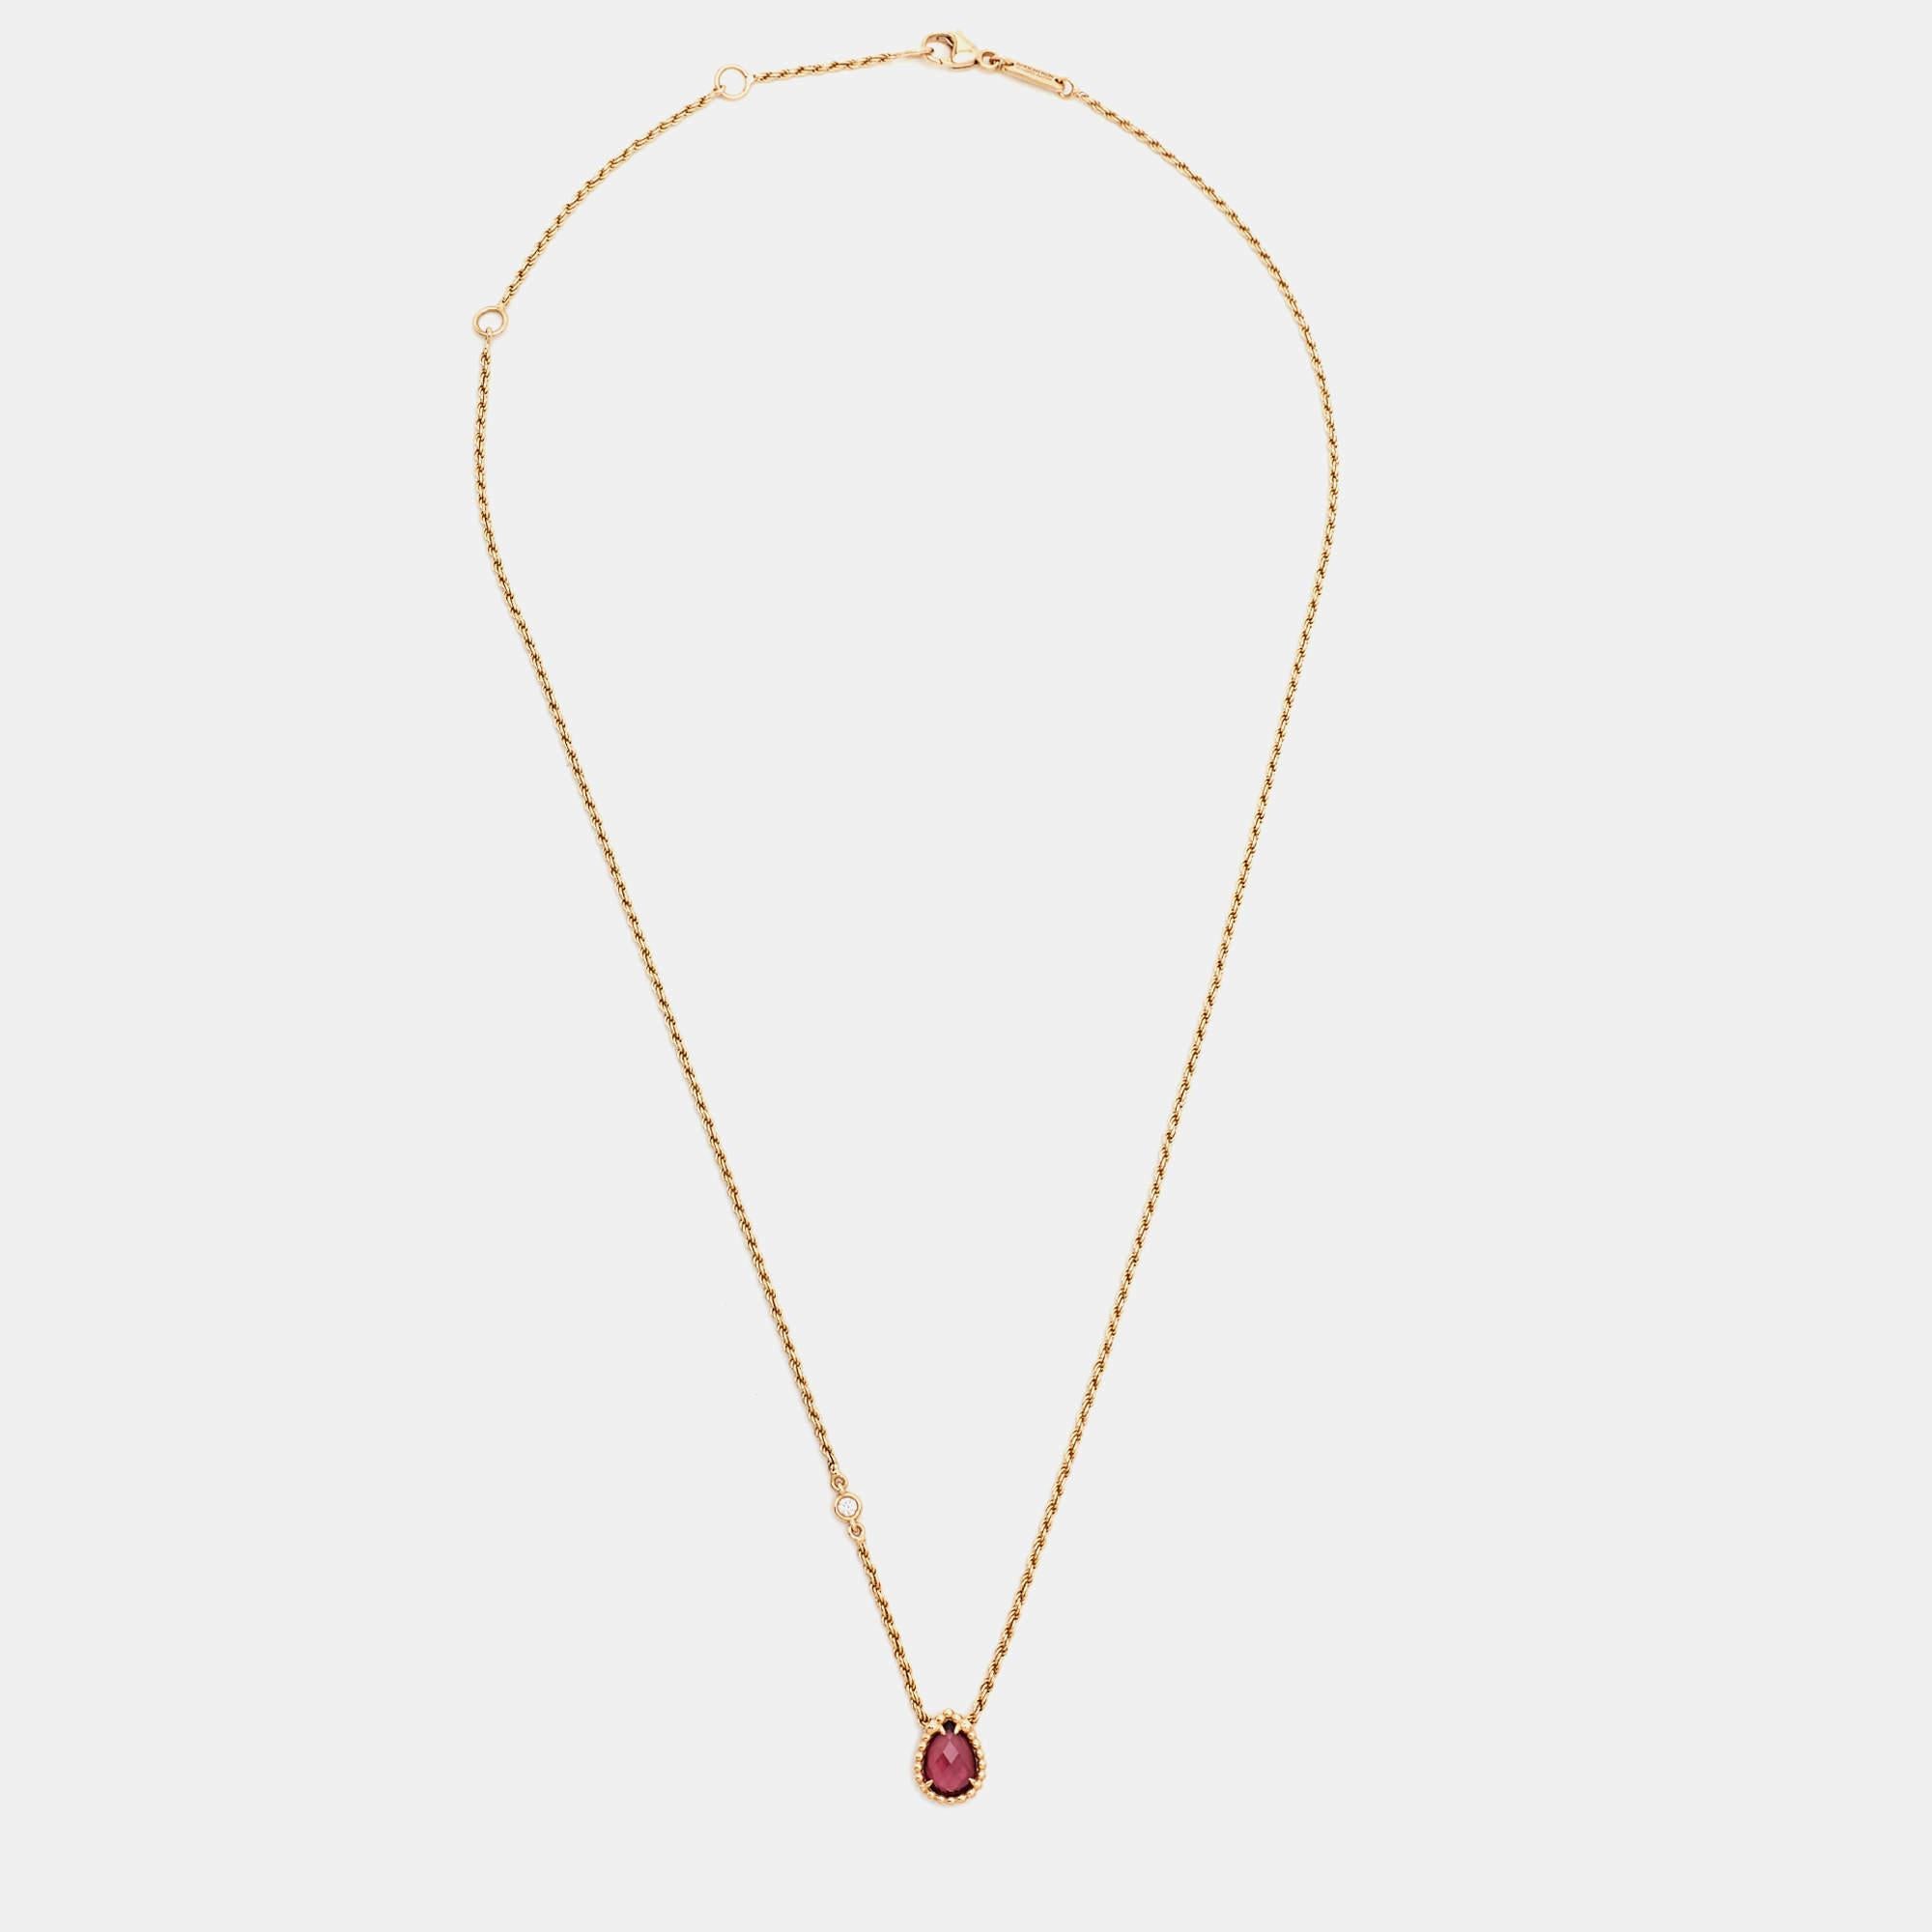 Boucheron's Serpent Boheme line from 1968 is a celebration of the house’s iconic serpent. The designs are defined by beaded borders, pear-shaped motifs, and coiled accents to represent the serpent’s textured skin. This necklace carries the signature